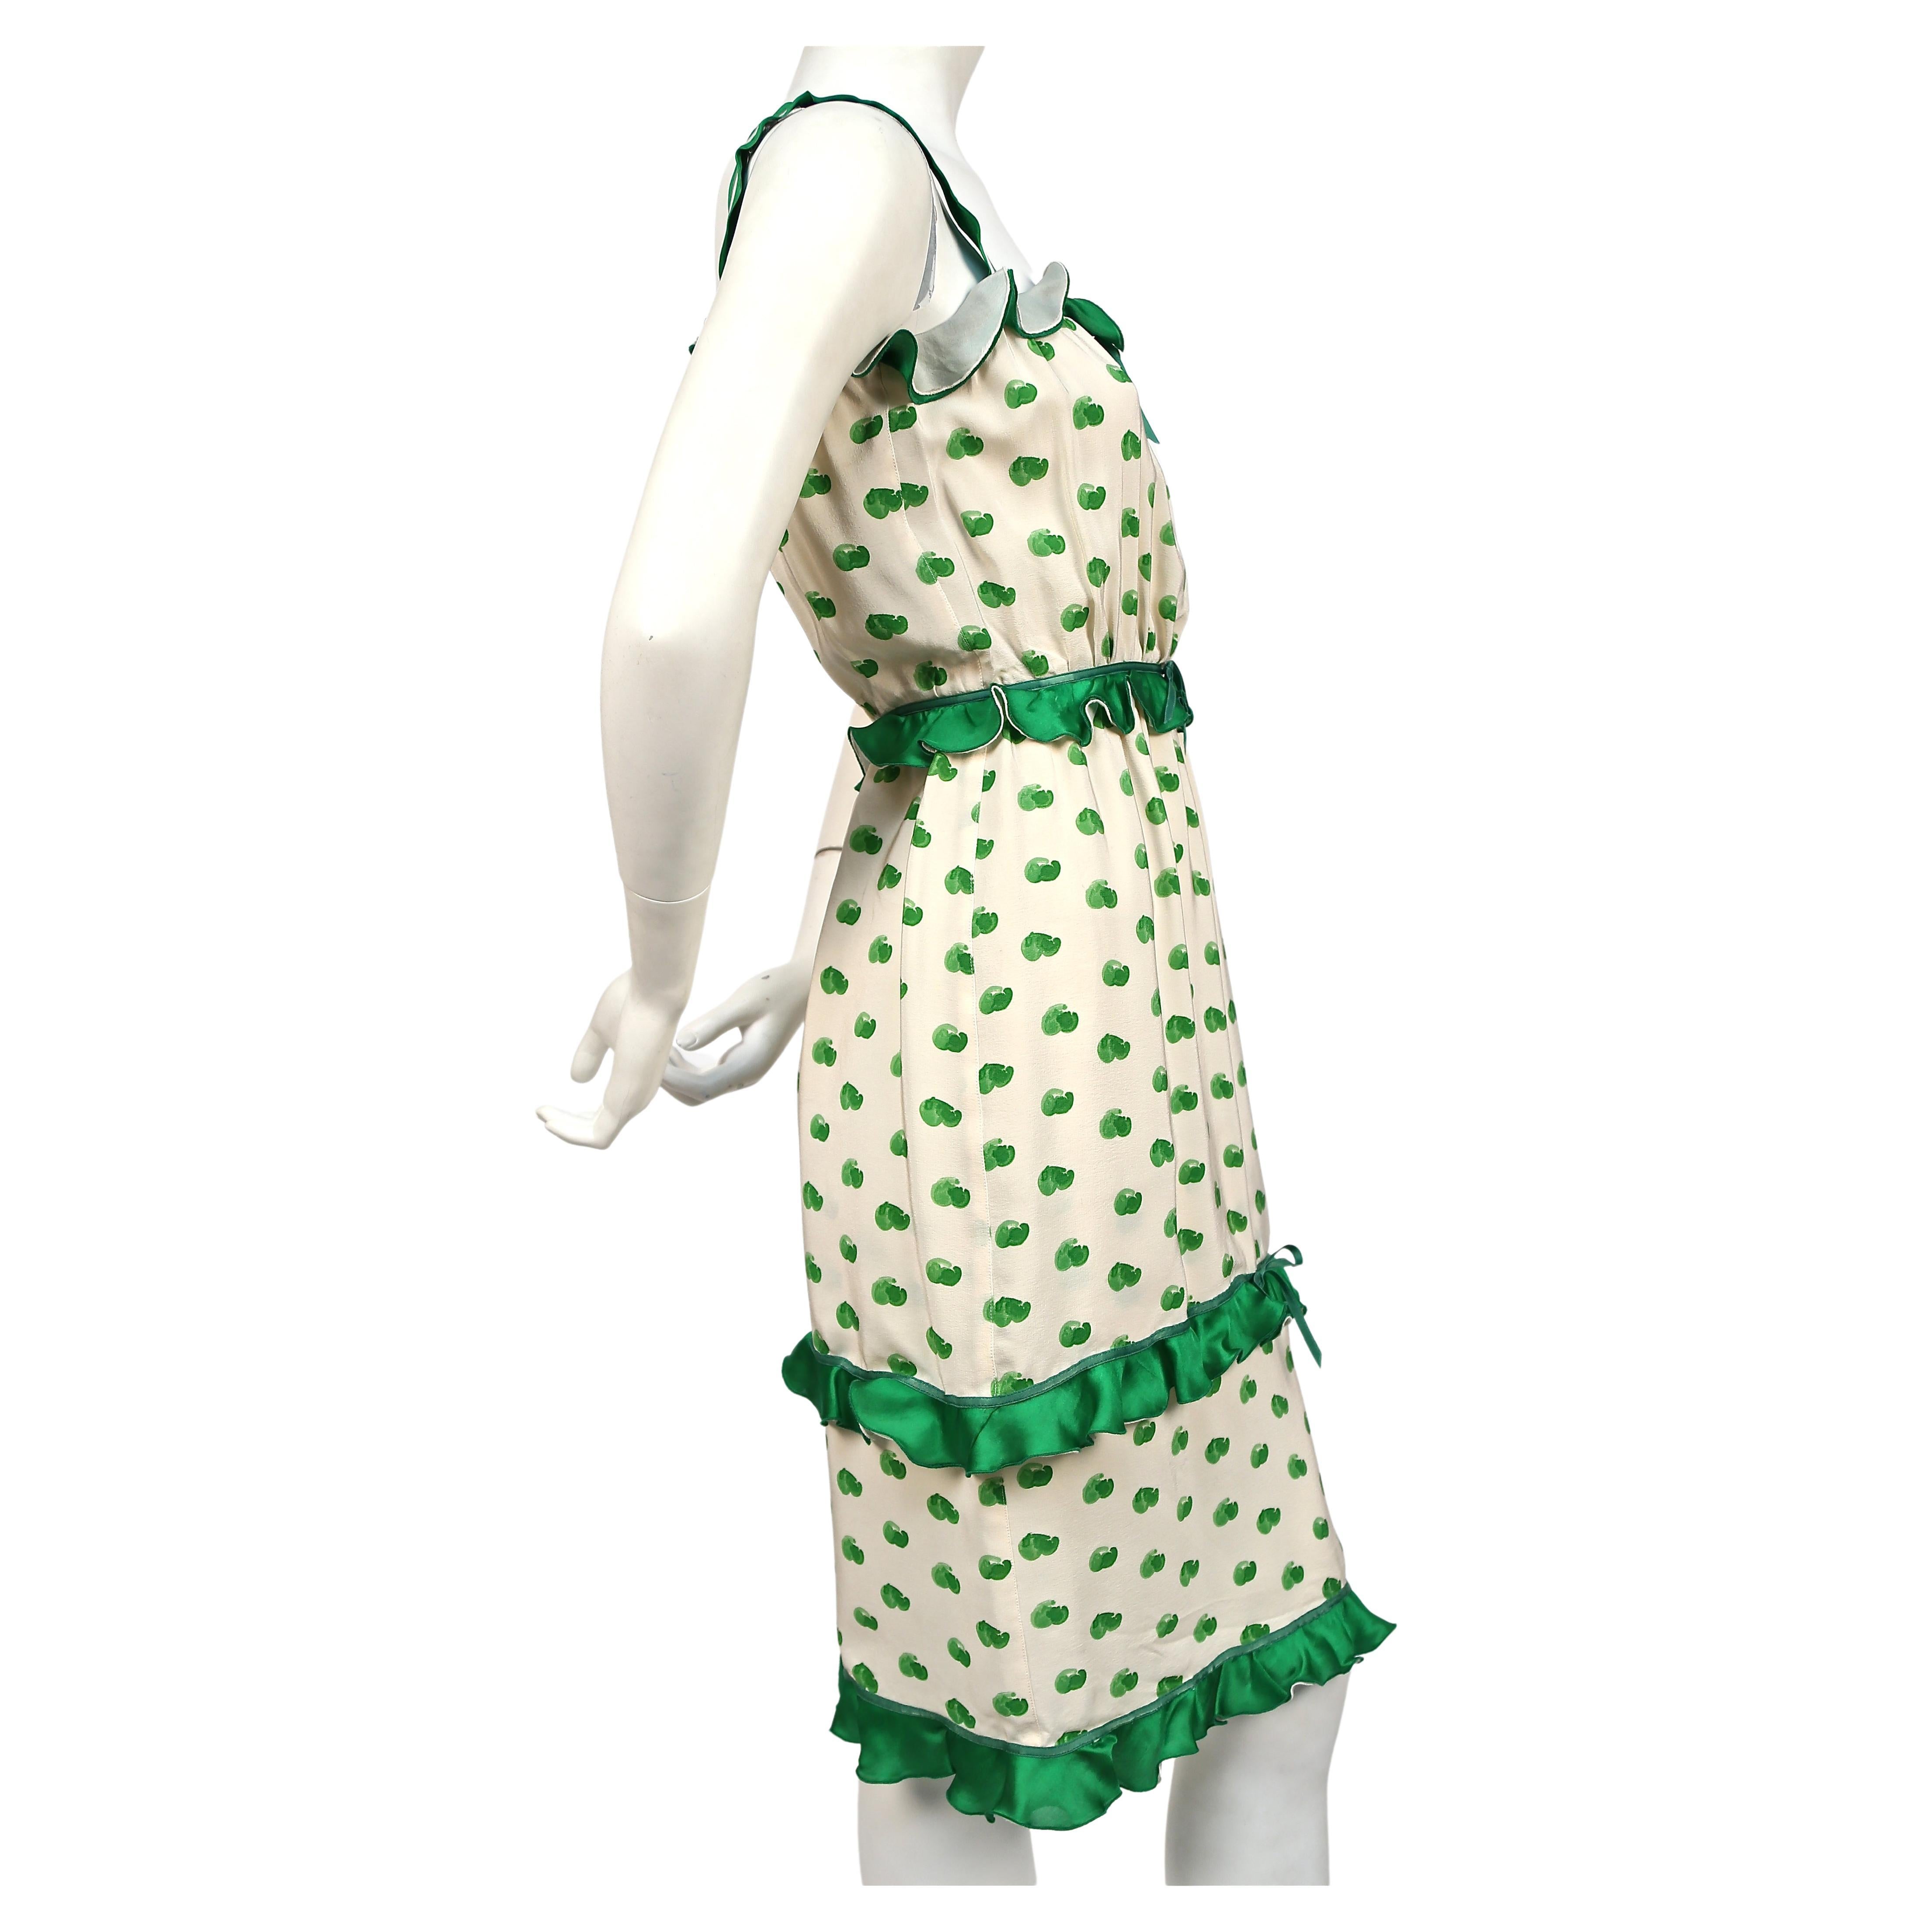 Green and off-white abstract printed silk dress with ruffles from Andre Courreges dating to the 1973. Labeled a Courreges '00' which fits a size 0/2. Approximate measurements: bust 30